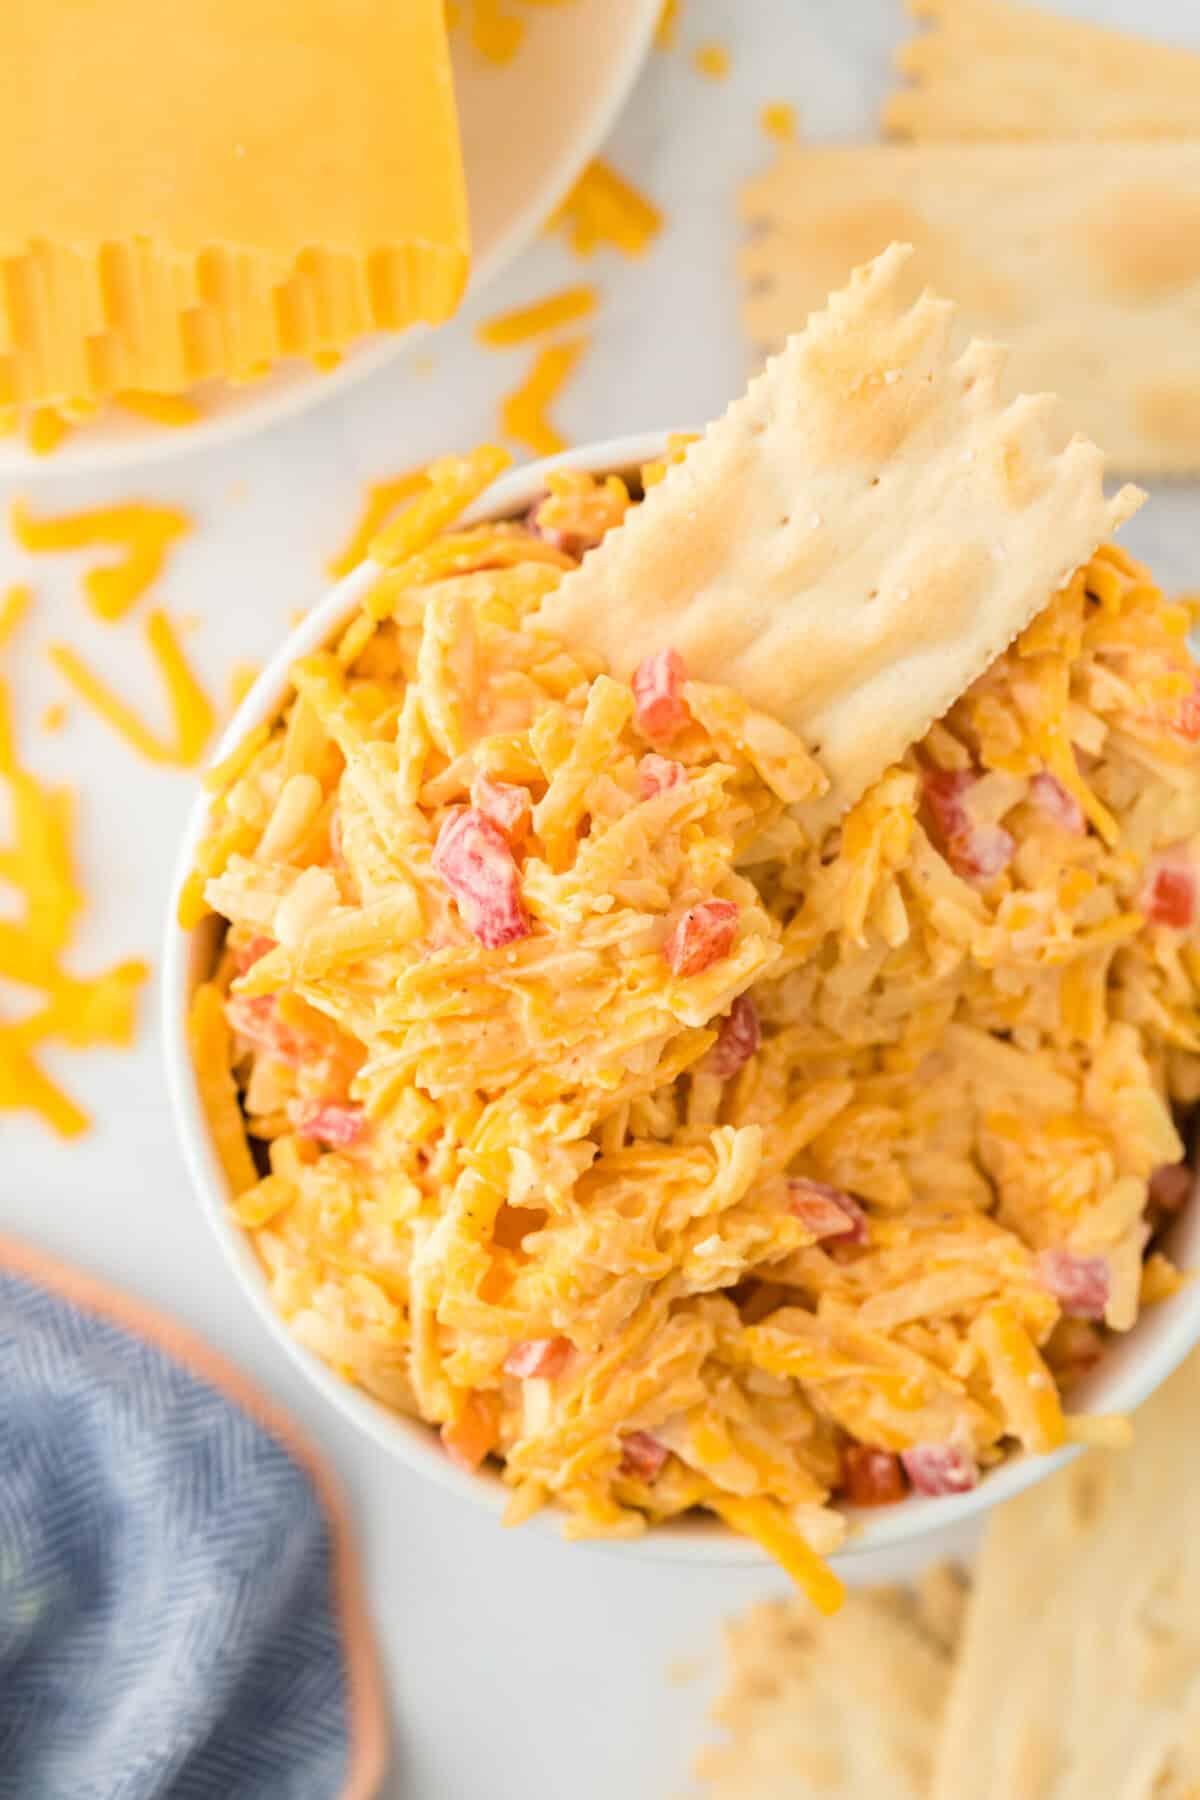 A cracker inside the best Southern pimento cheese recipe with cheese in the white background